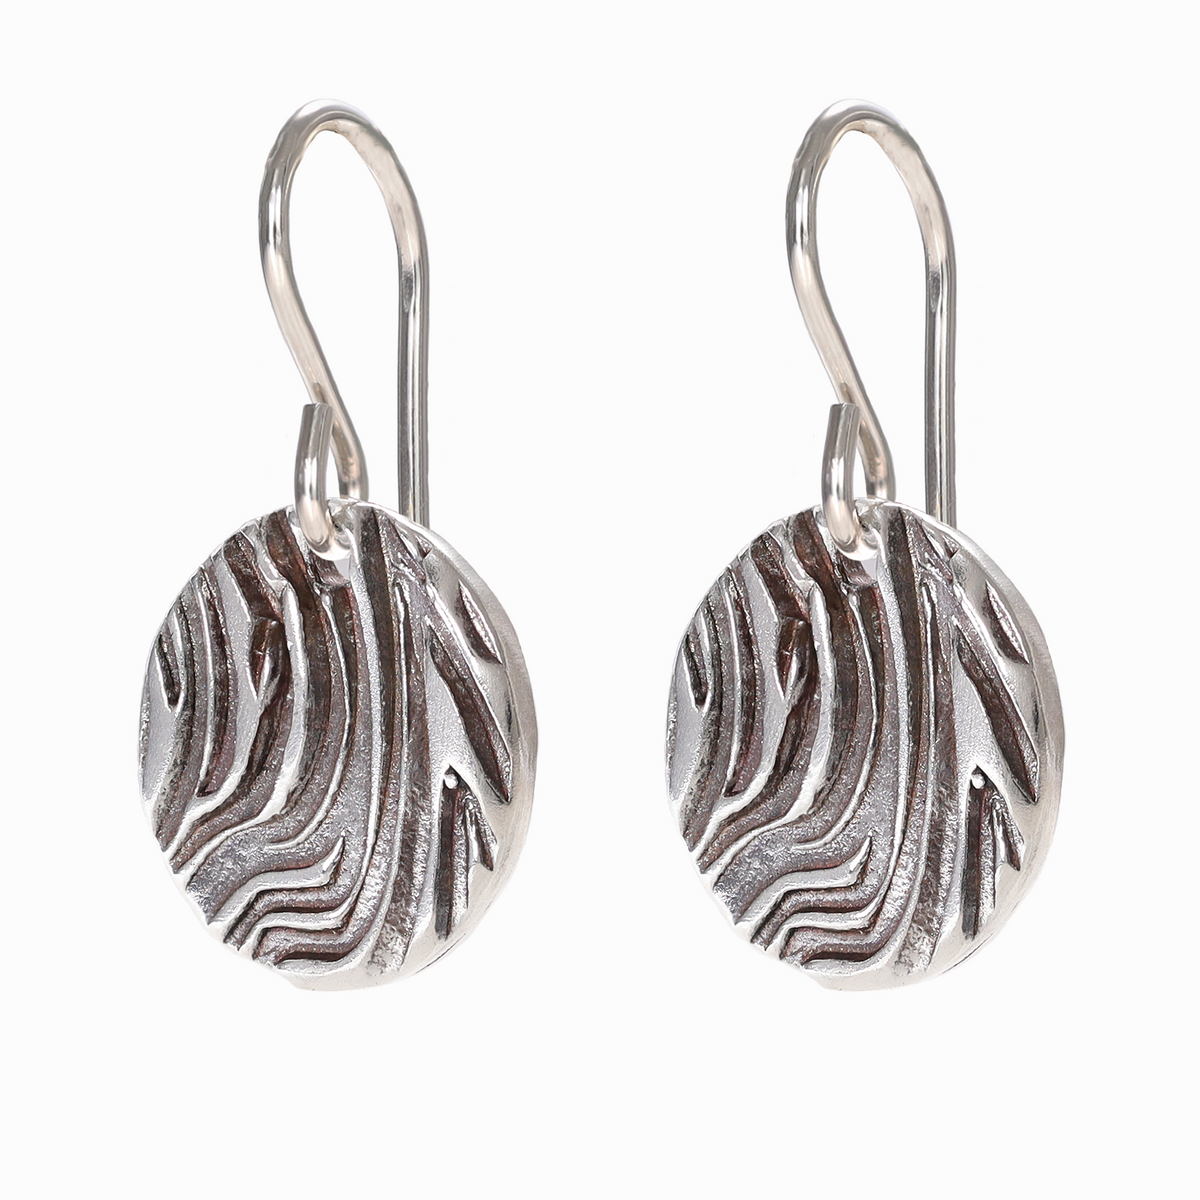 Wind Textured Small Sterling Silver Earrings on Short Ear Wires